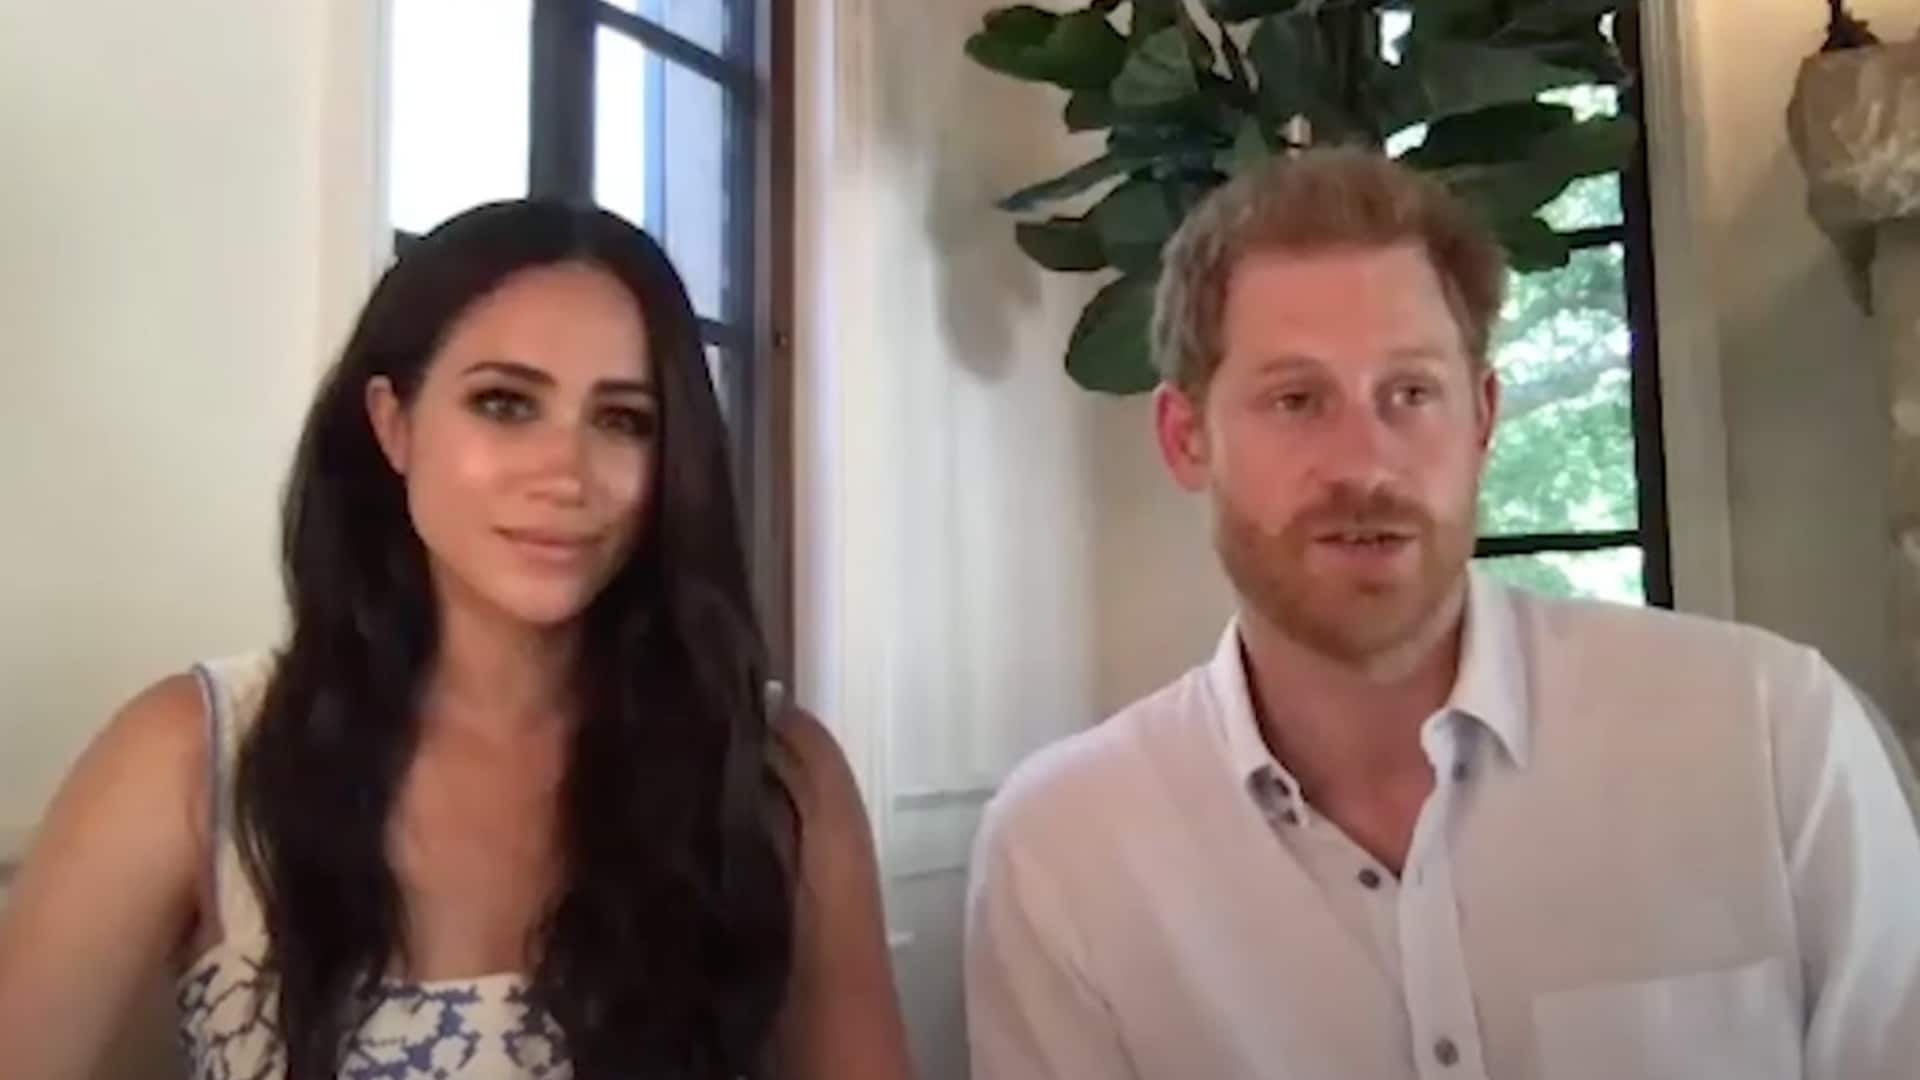 Meghan Markle and Prince Harry make first joint appearance from their new home